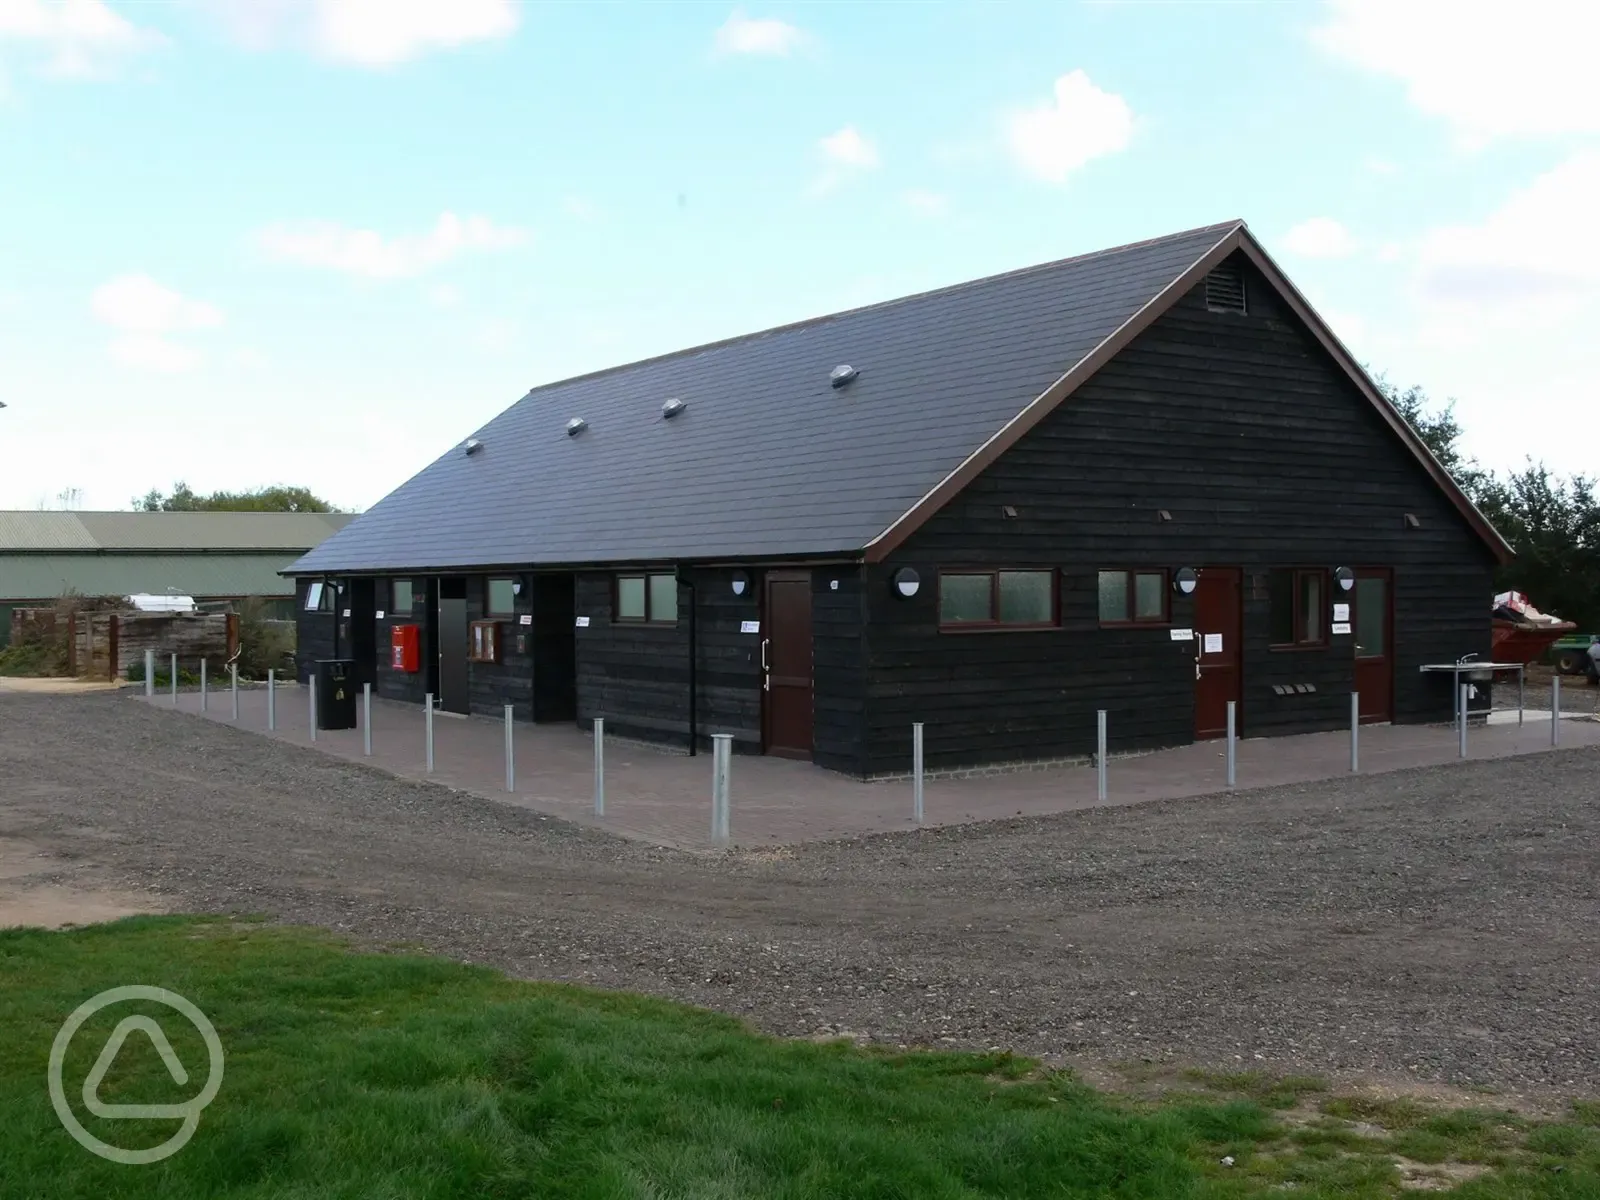 Award winning toilet block with disabled and family facilities